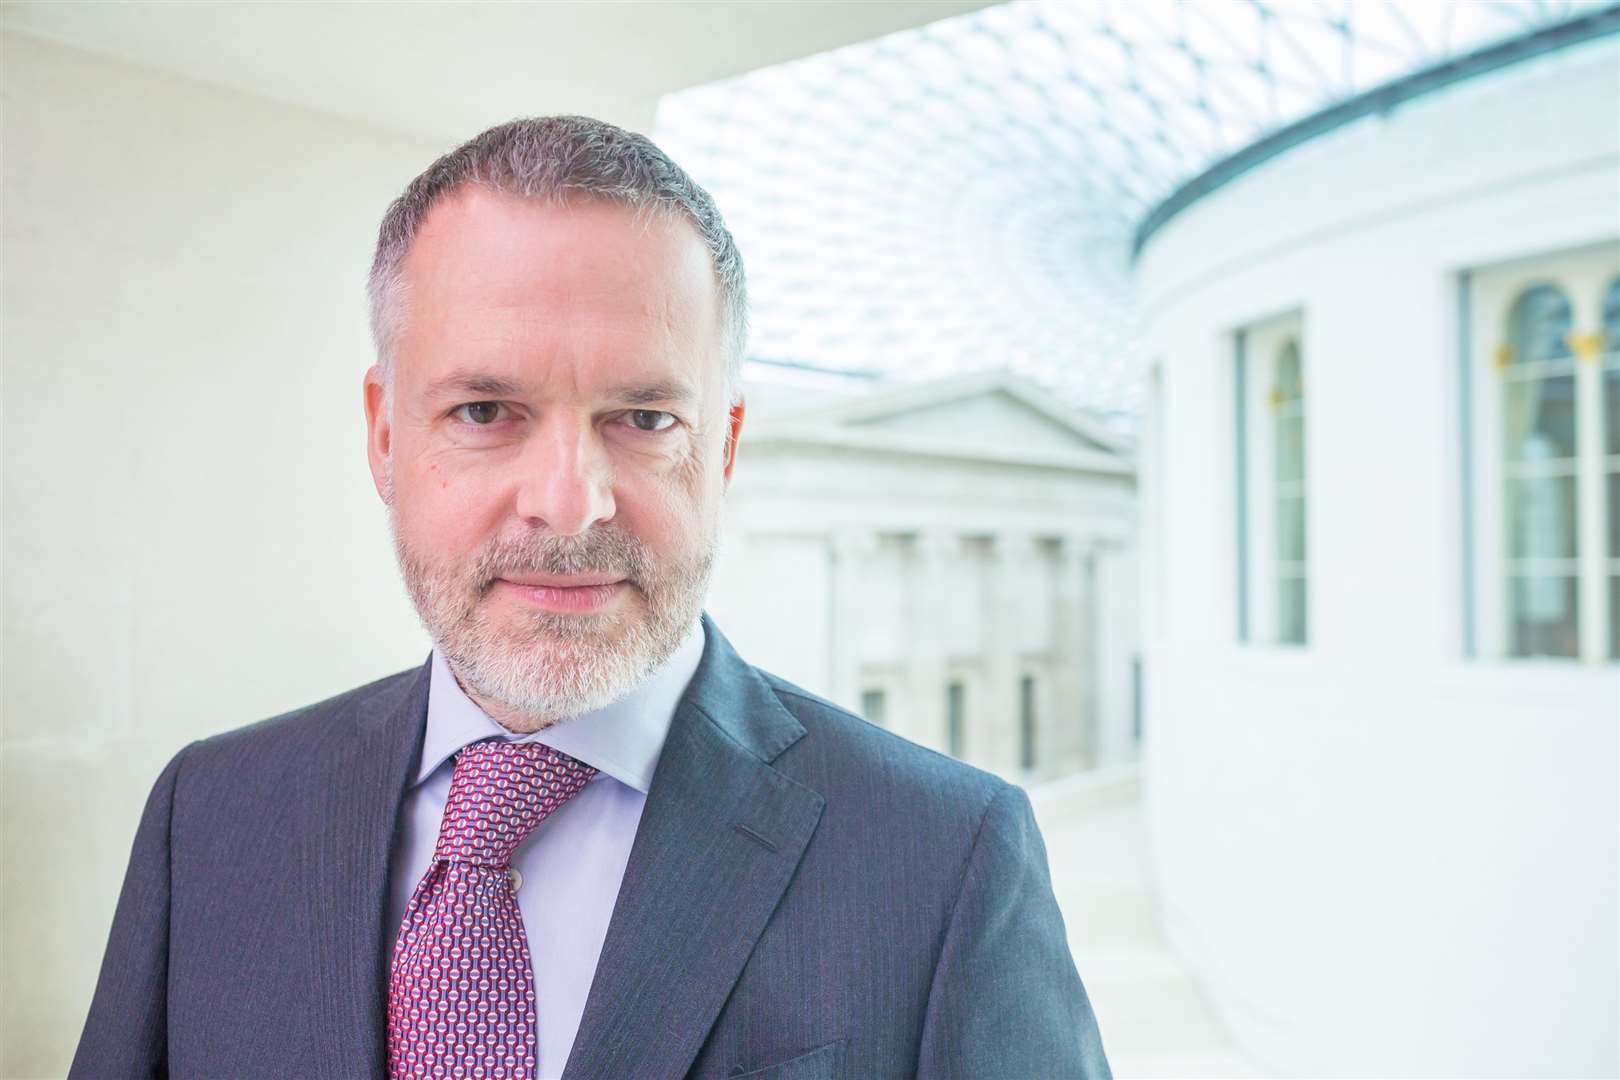 Hartwig Fischer, who will step down as director of the British Museum next year. (Benedict Johnson/The British Museum)